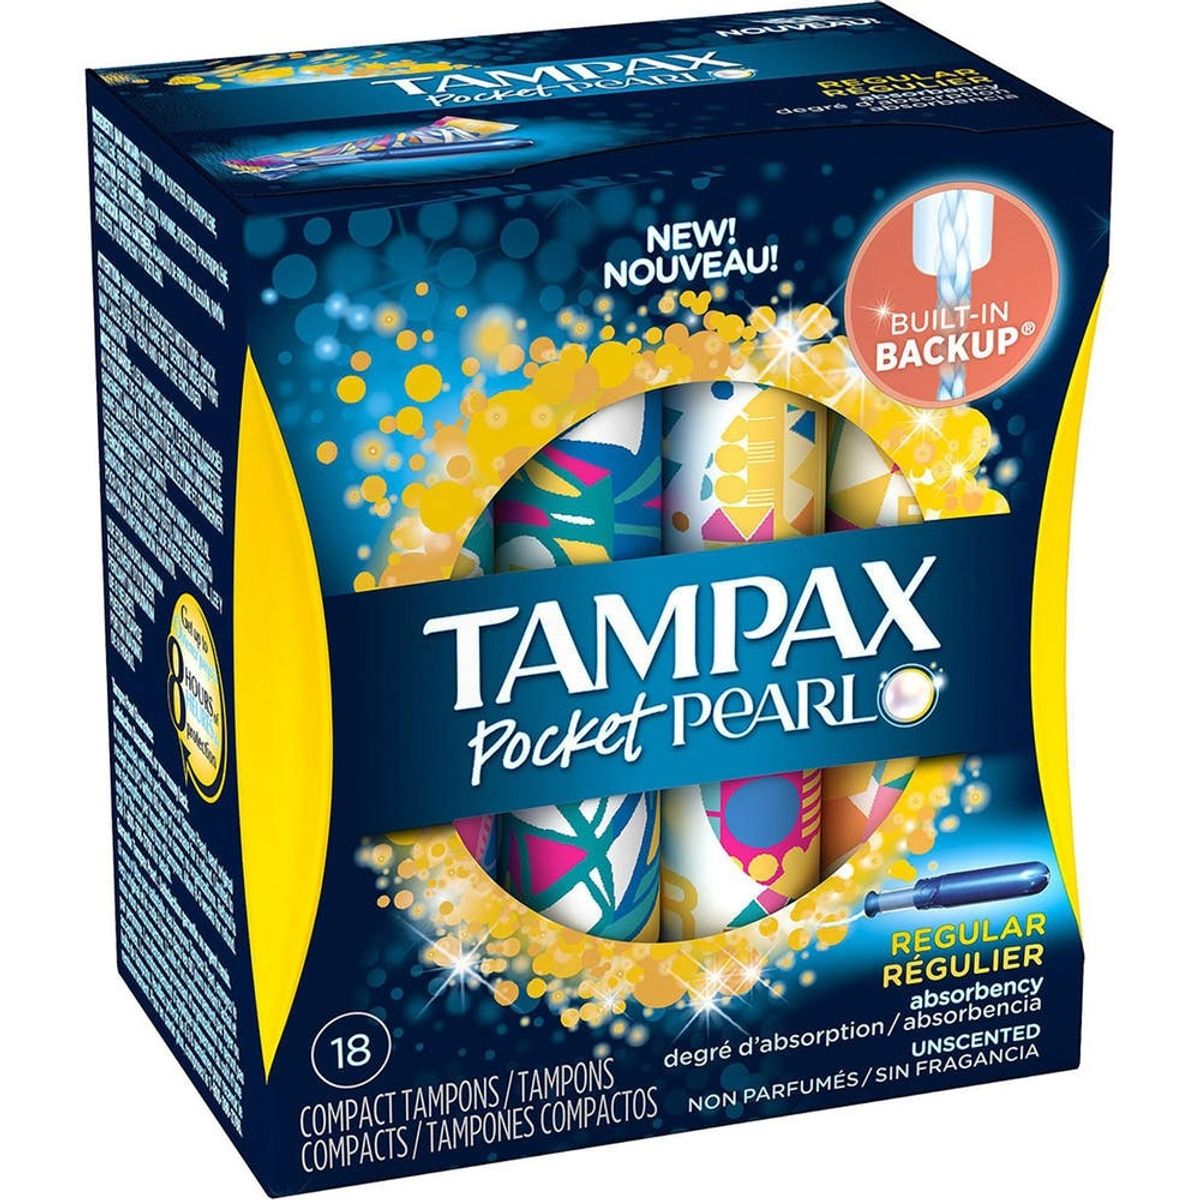 Why Women Are Very Upset About This New Brand of Tampons